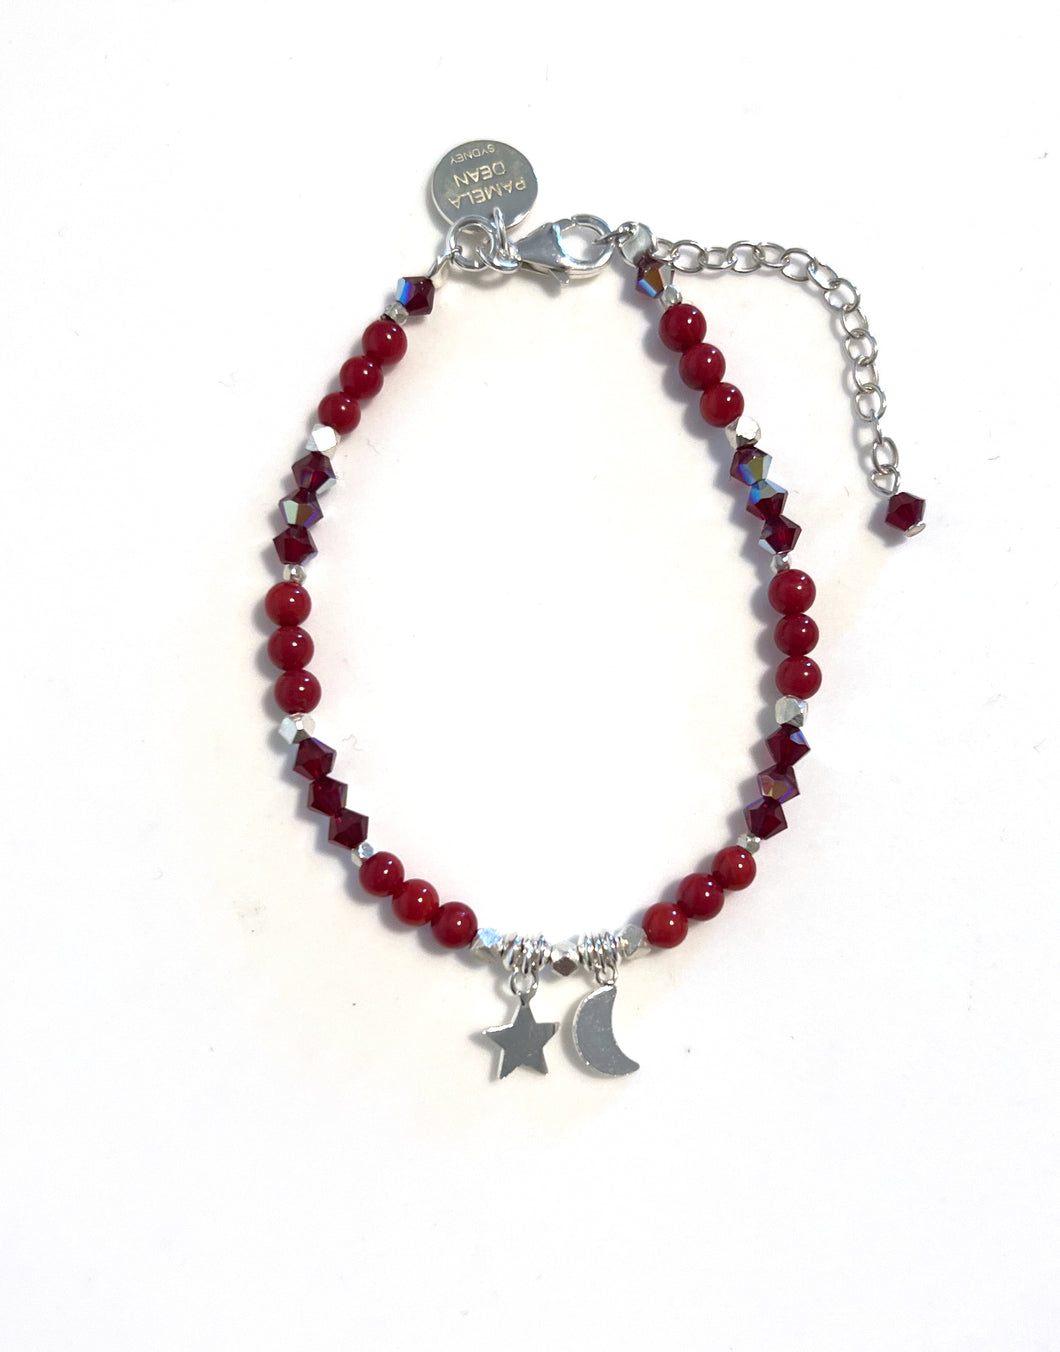 Red Coral Bracelet with Swarovski Crystals and Sterling Silver Star and Moon Charms